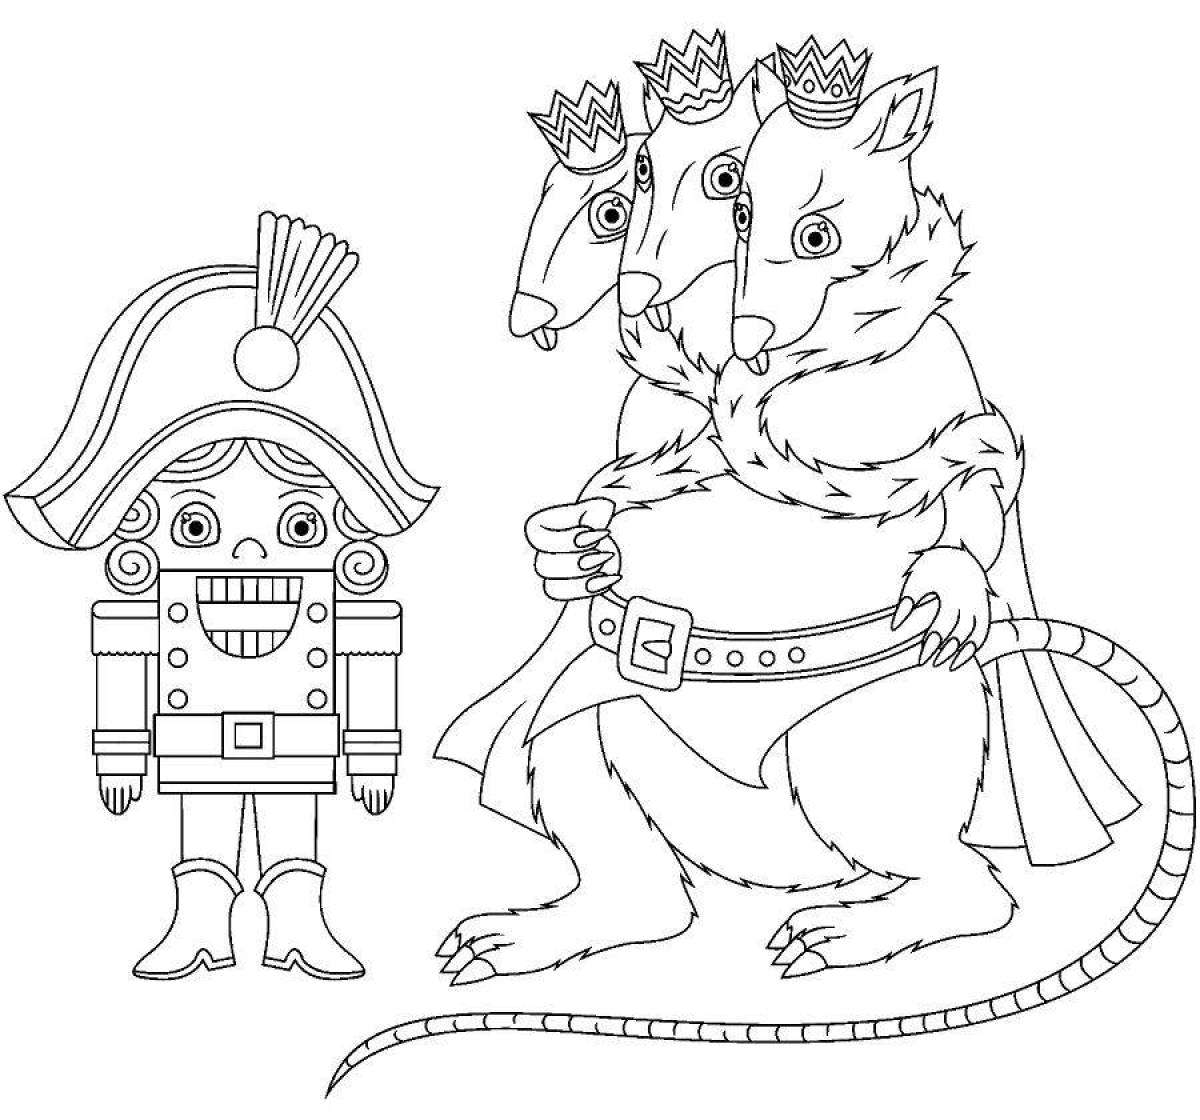 The Nutcracker and the Mouse King #1